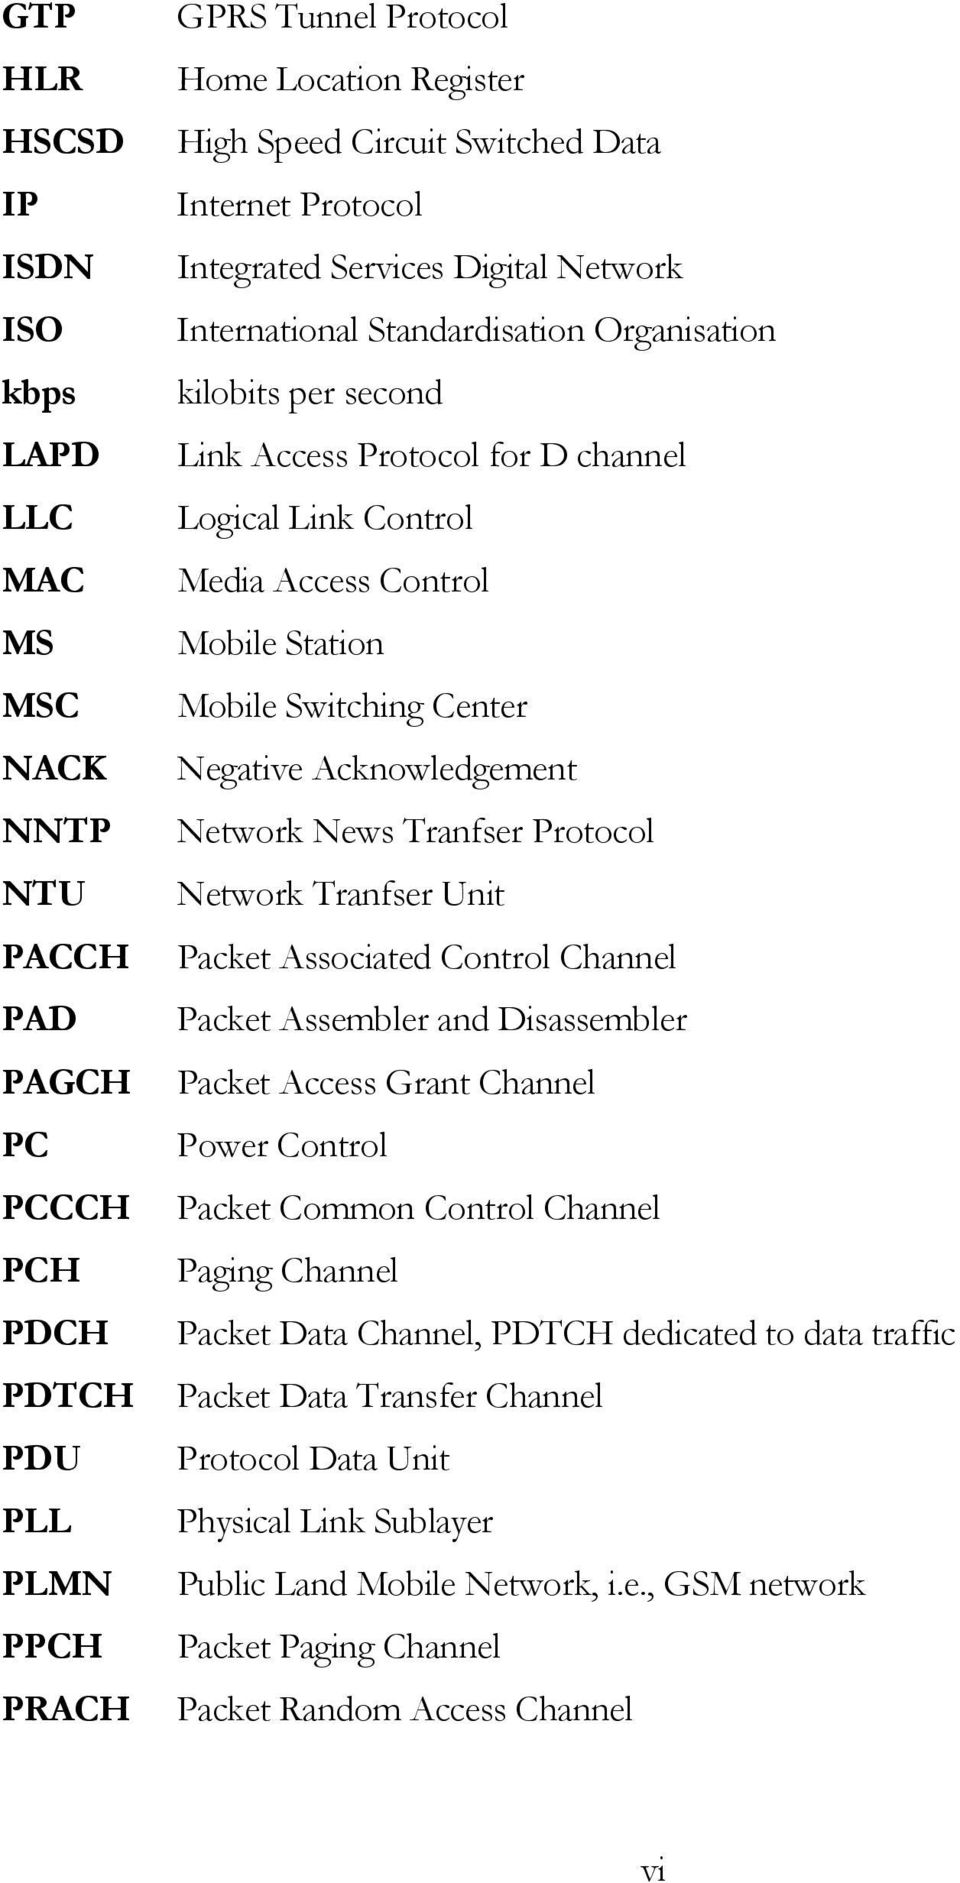 Control Mobile Station Mobile Switching Center Negative Acknowledgement Network News Tranfser Protocol Network Tranfser Unit Packet Associated Control Channel Packet Assembler and Disassembler Packet